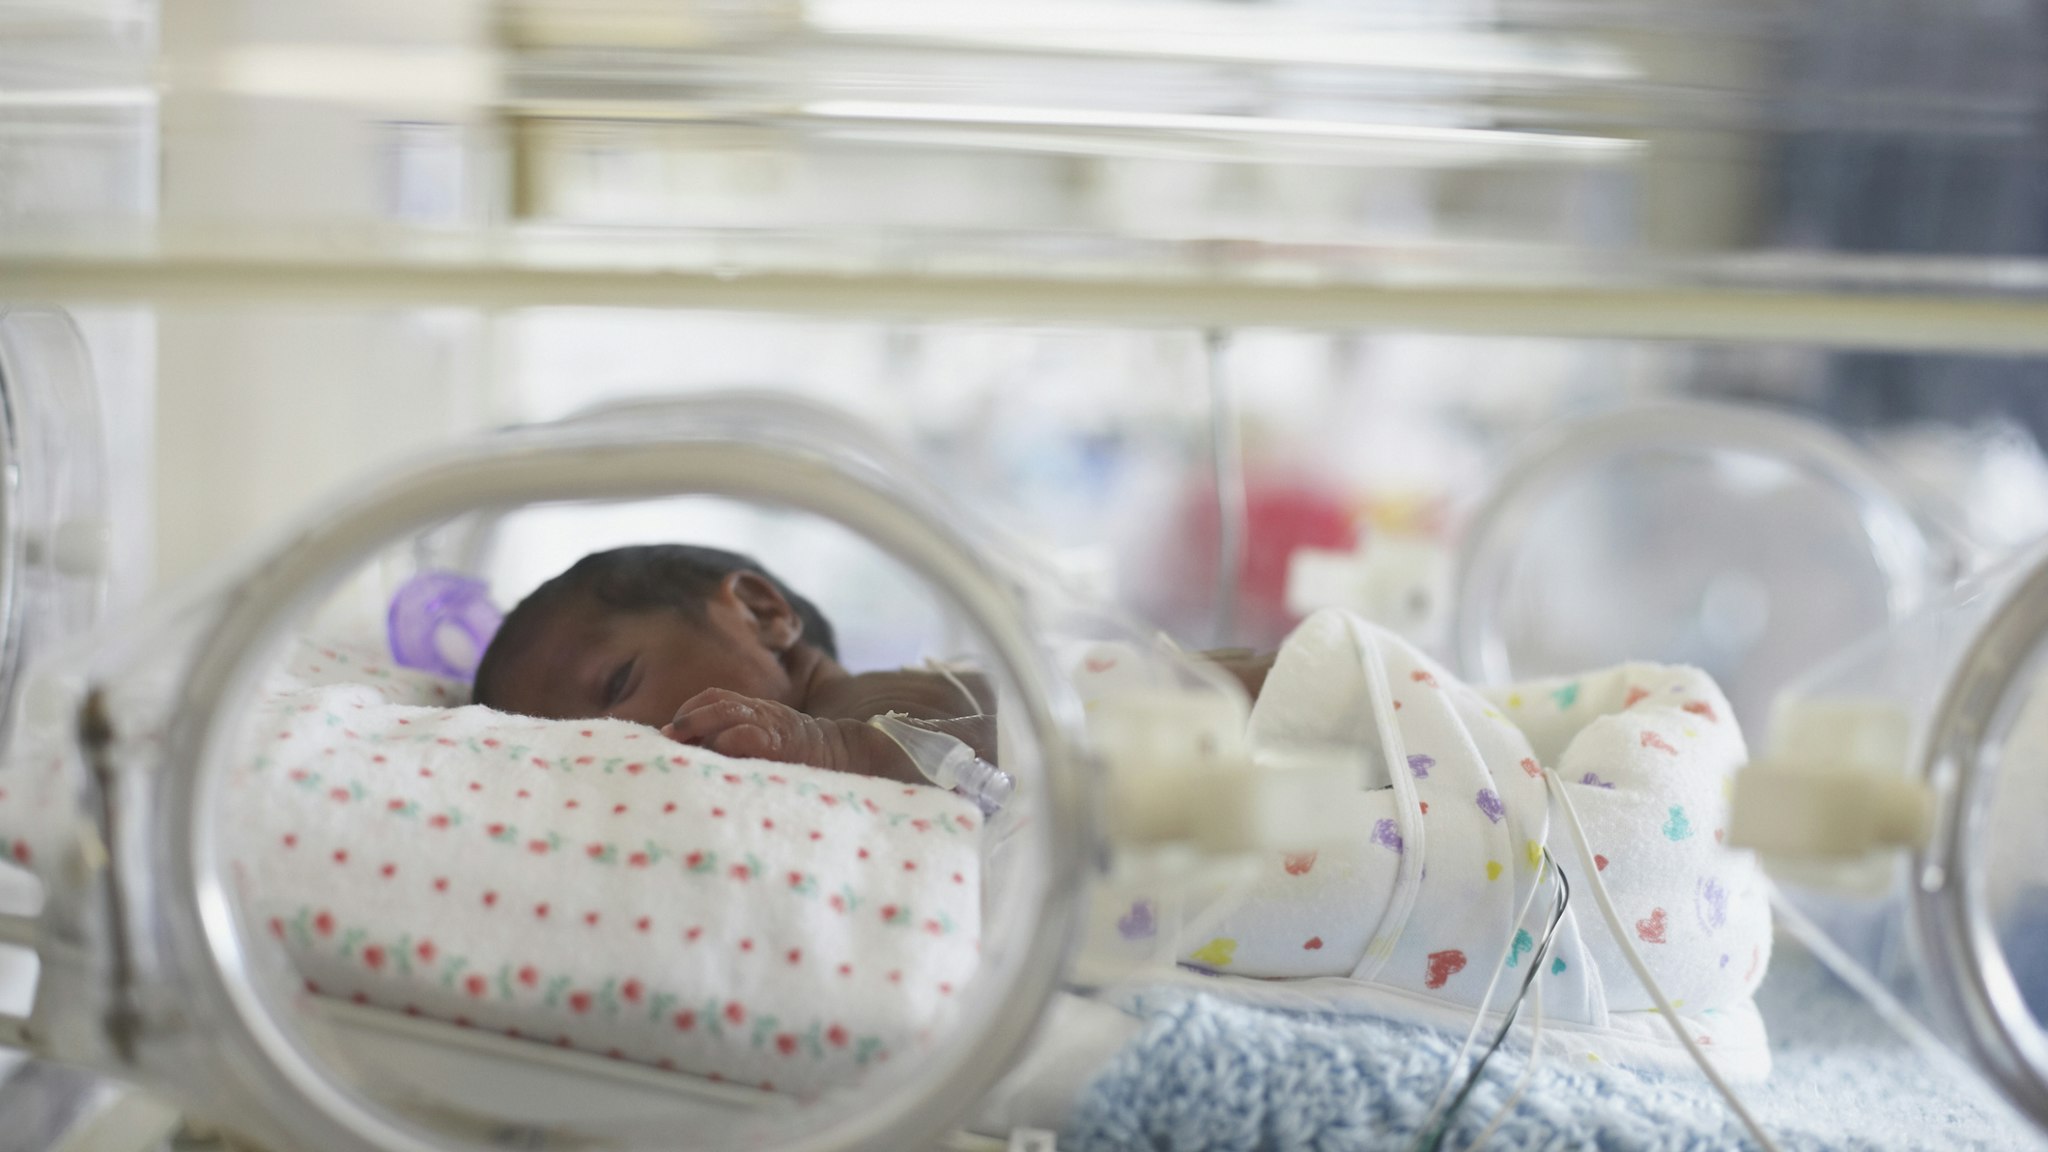 African American baby in hospital incubator - stock photo